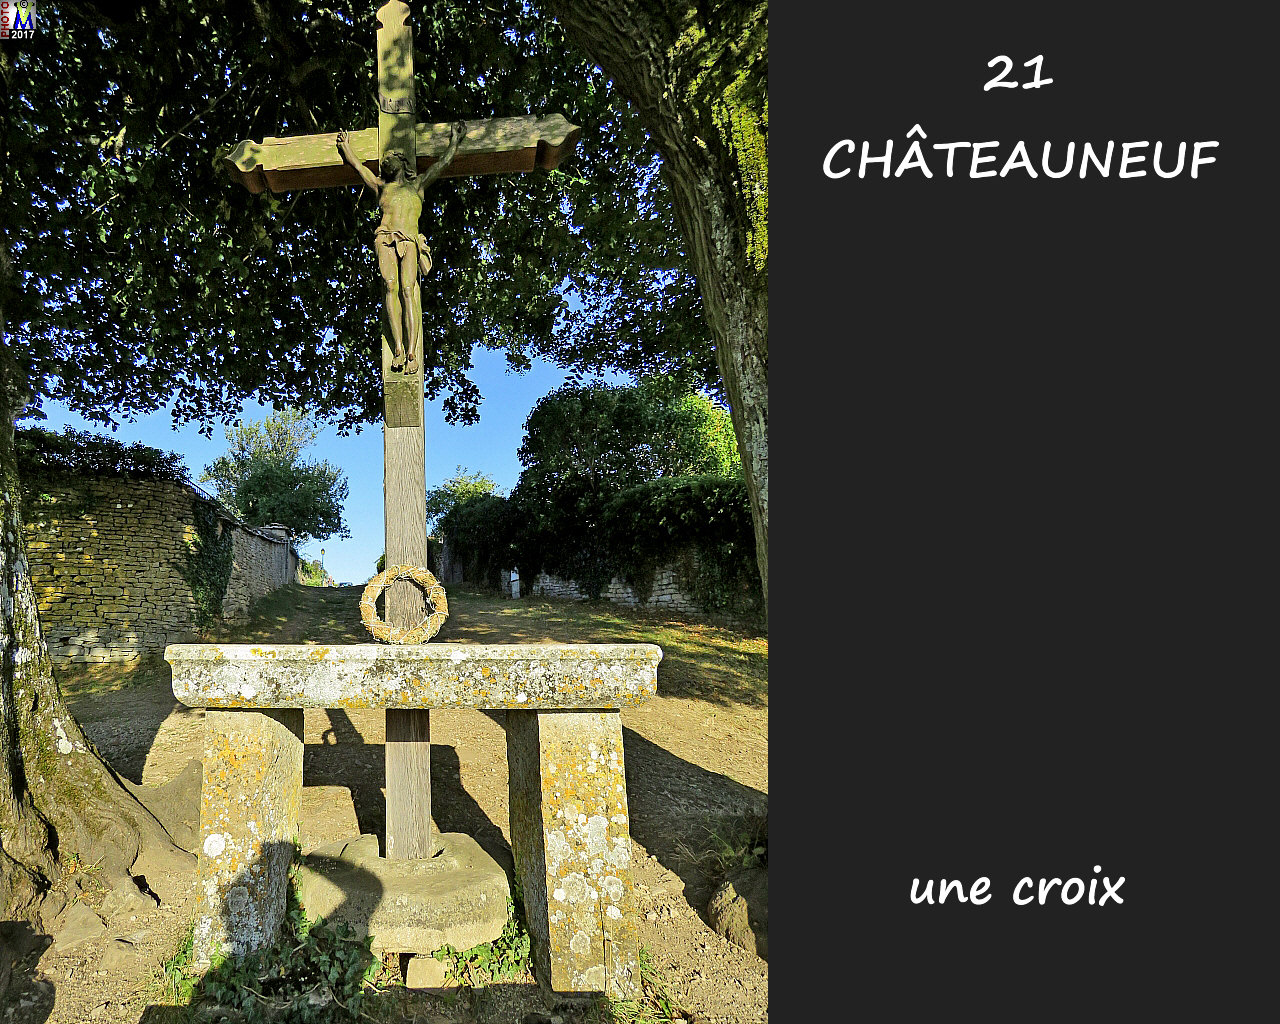 21CHATEAUNEUF_croix_120.jpg